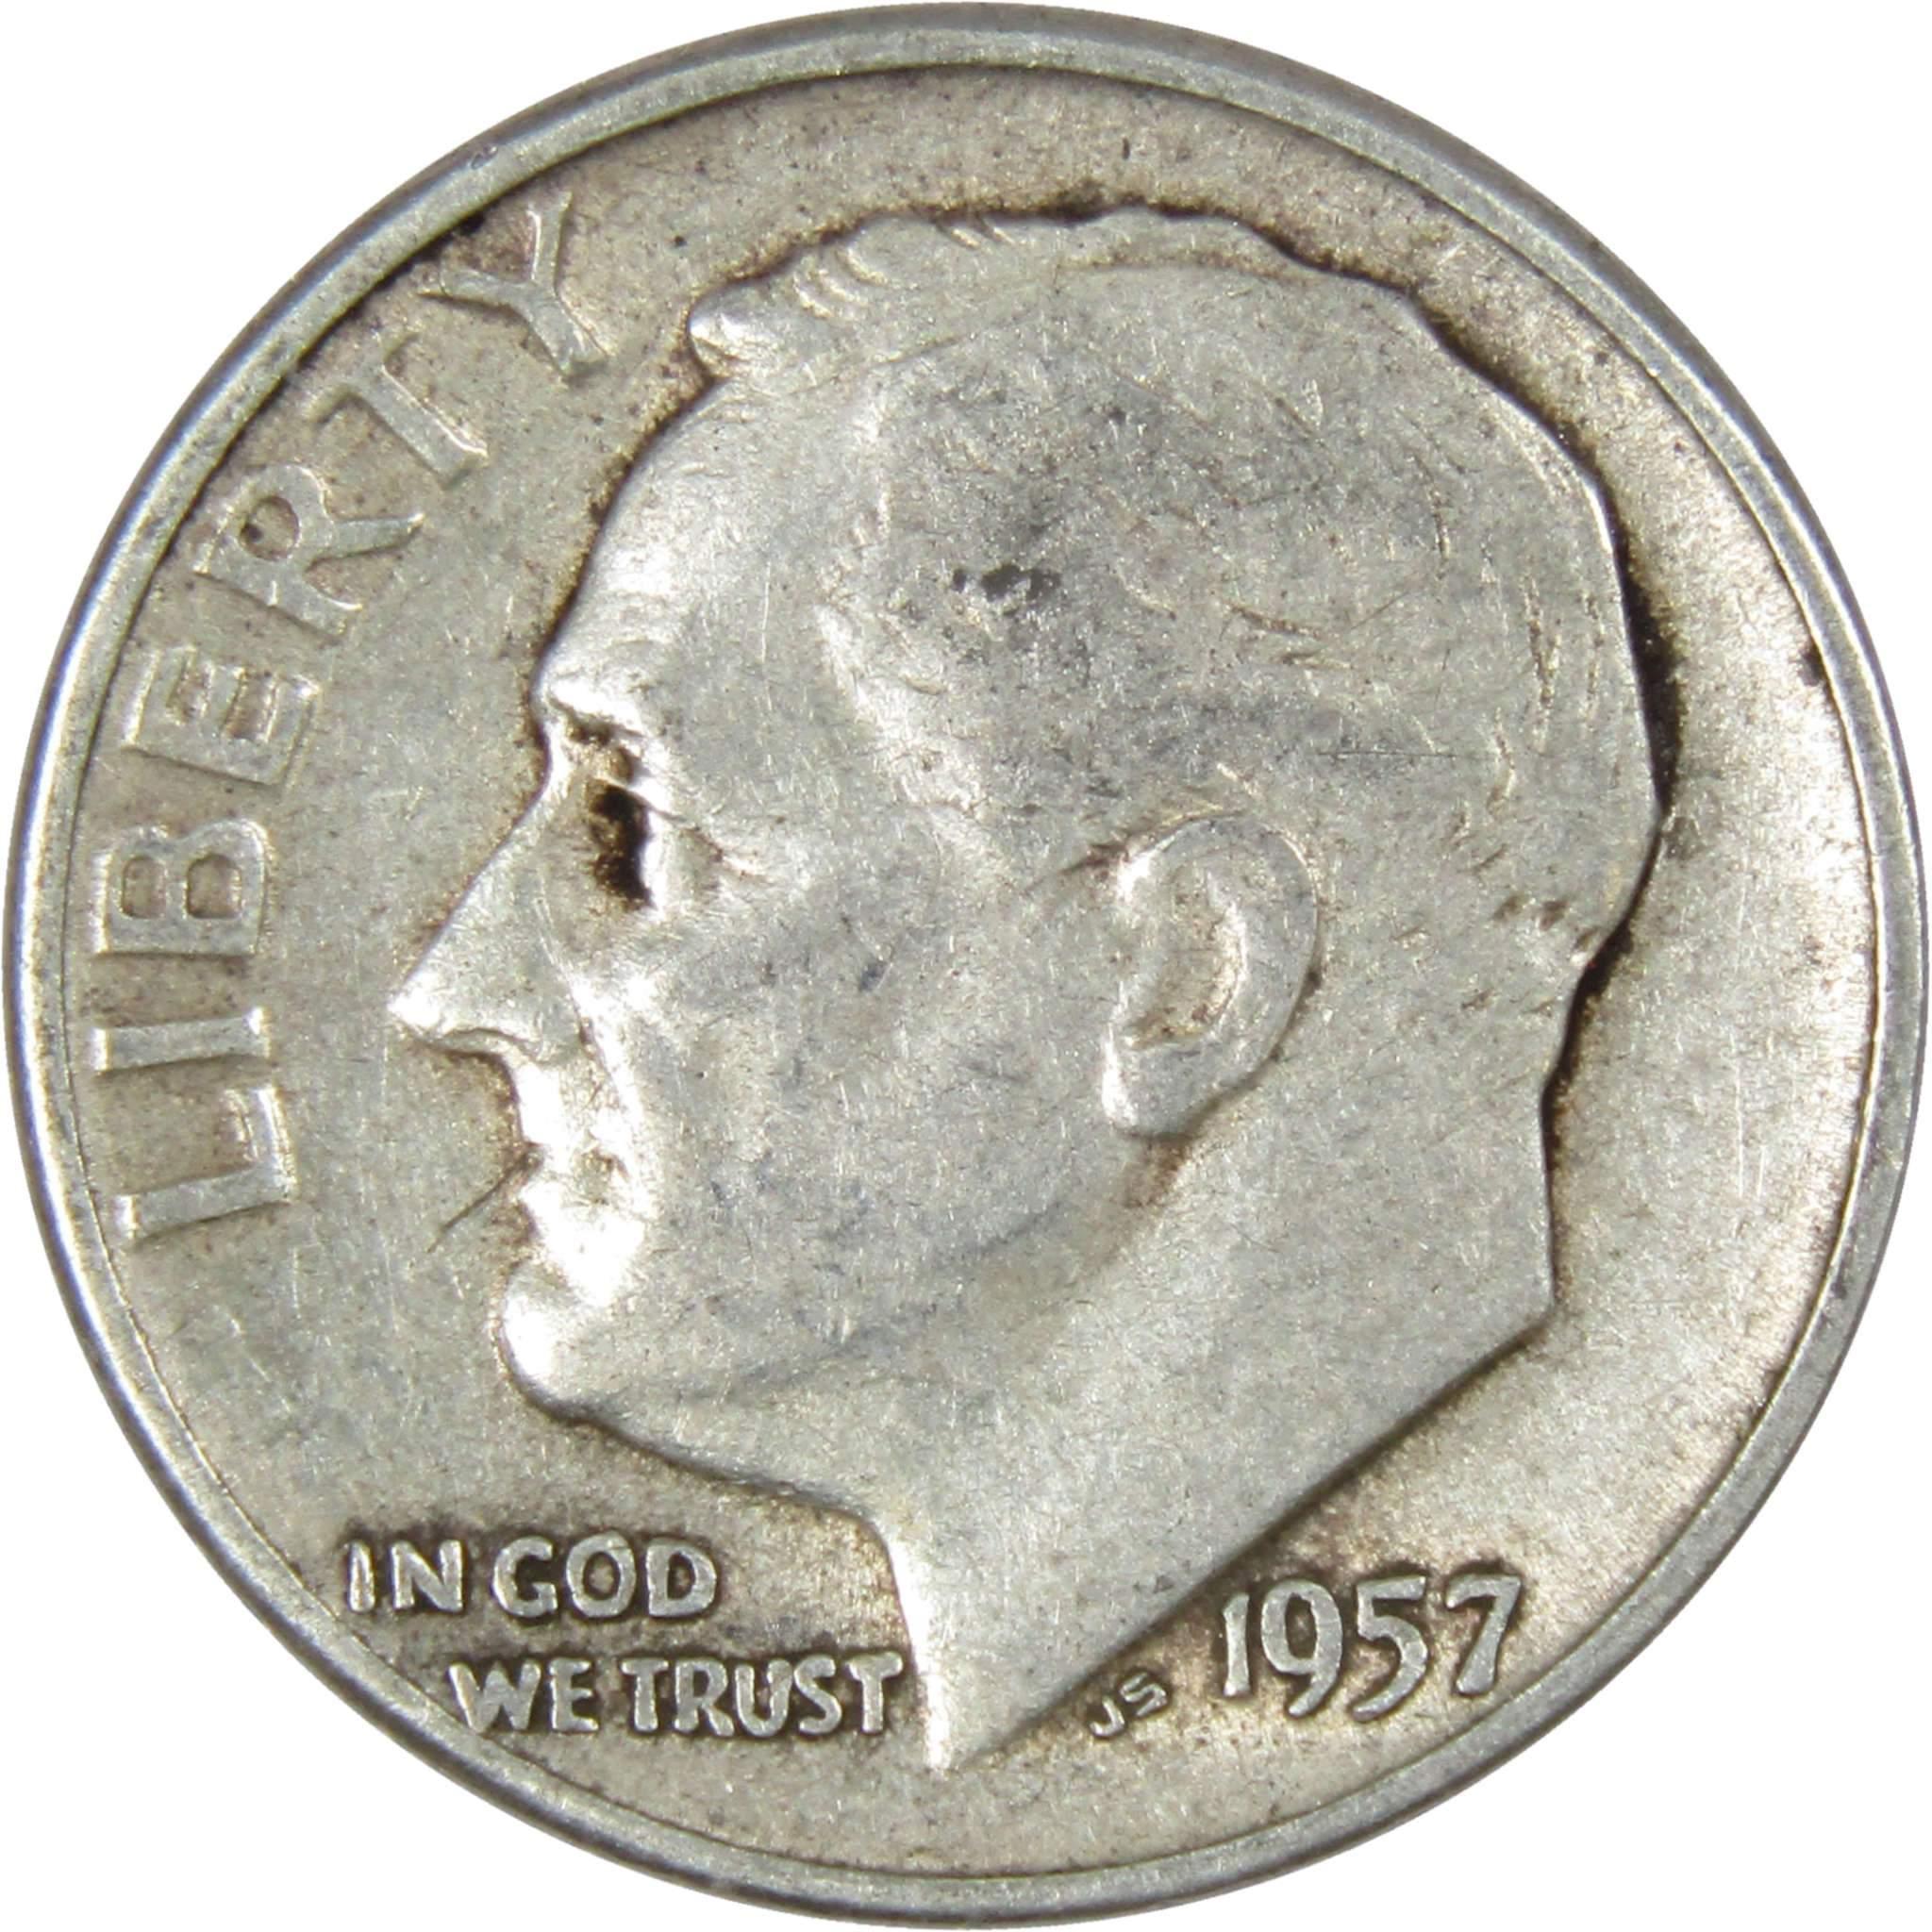 1957 Roosevelt Dime AG About Good 90% Silver 10c US Coin Collectible